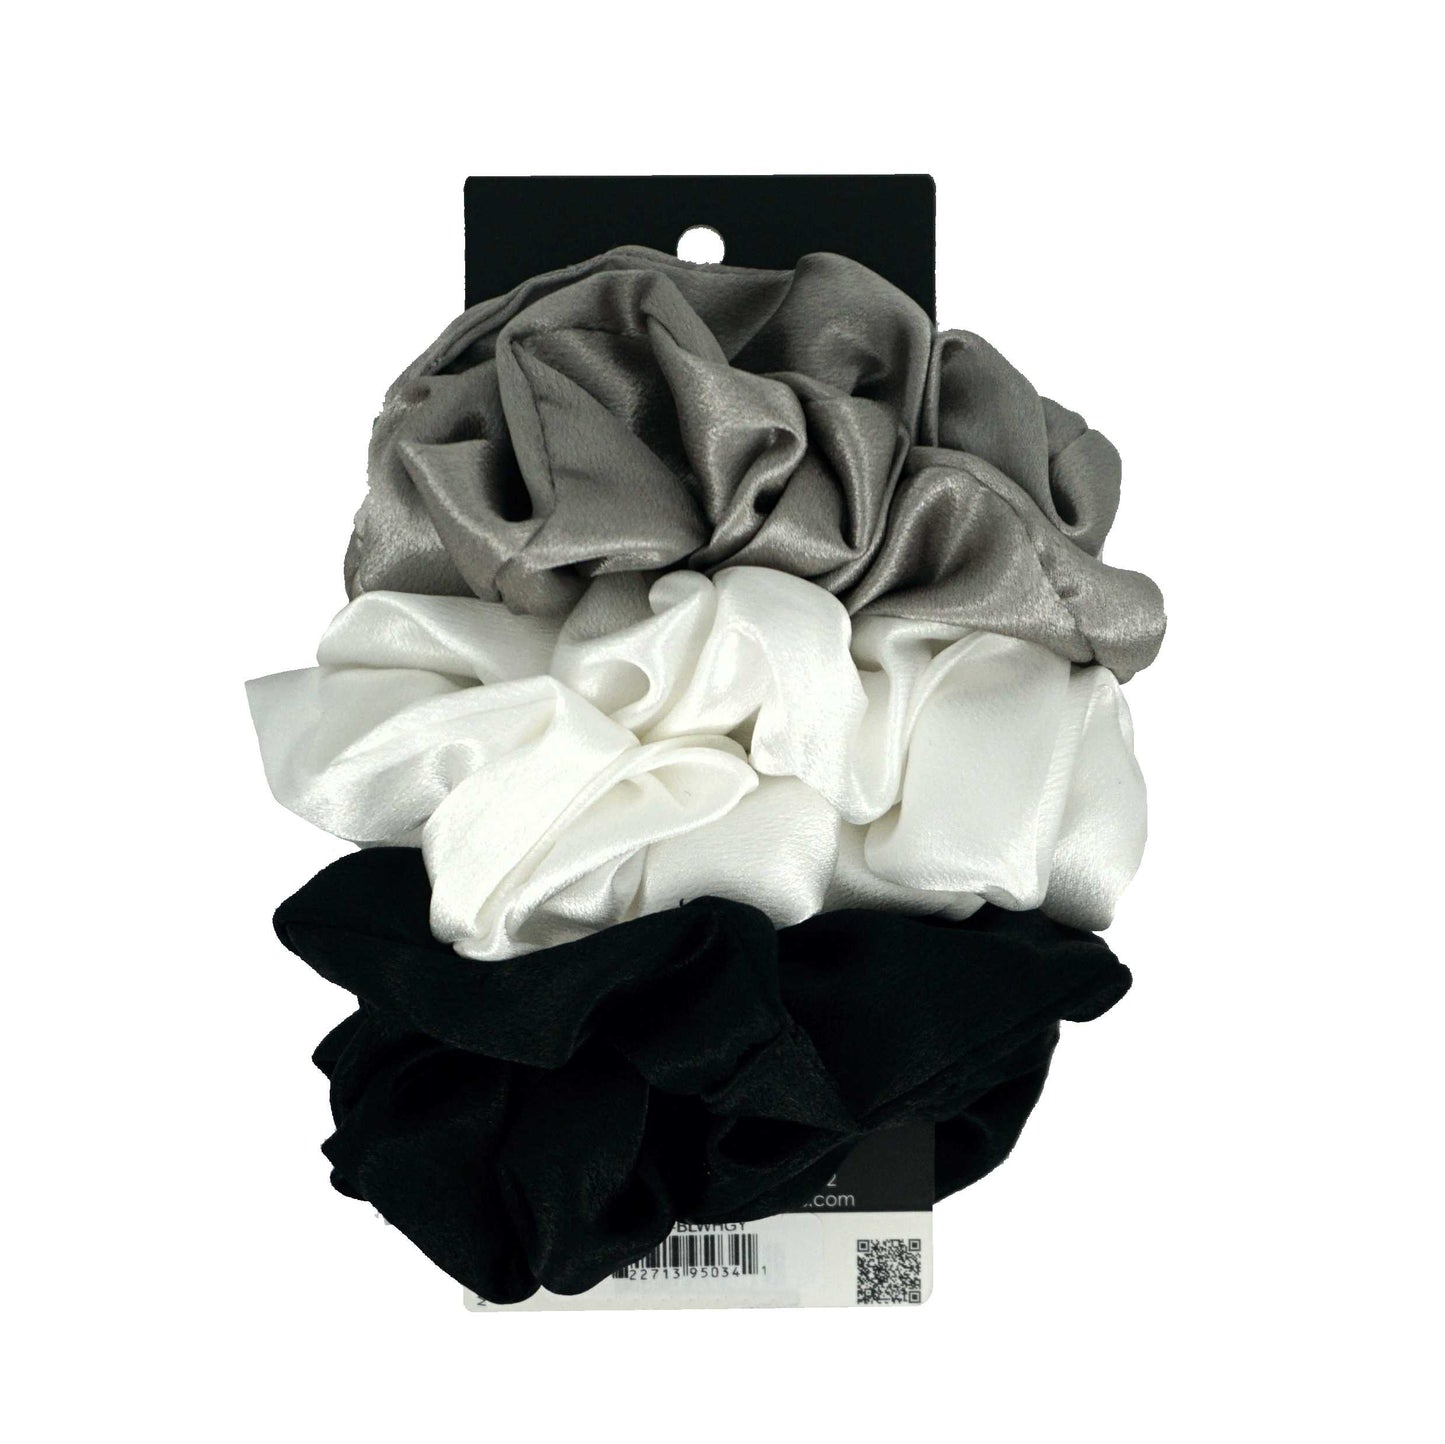 Amelia Beauty Products, Black, White and Gray Scrunchies, 4.5in Diameter, Gentle on Hair, Strong Hold, No Snag, No Dents or Creases. 6 Pack